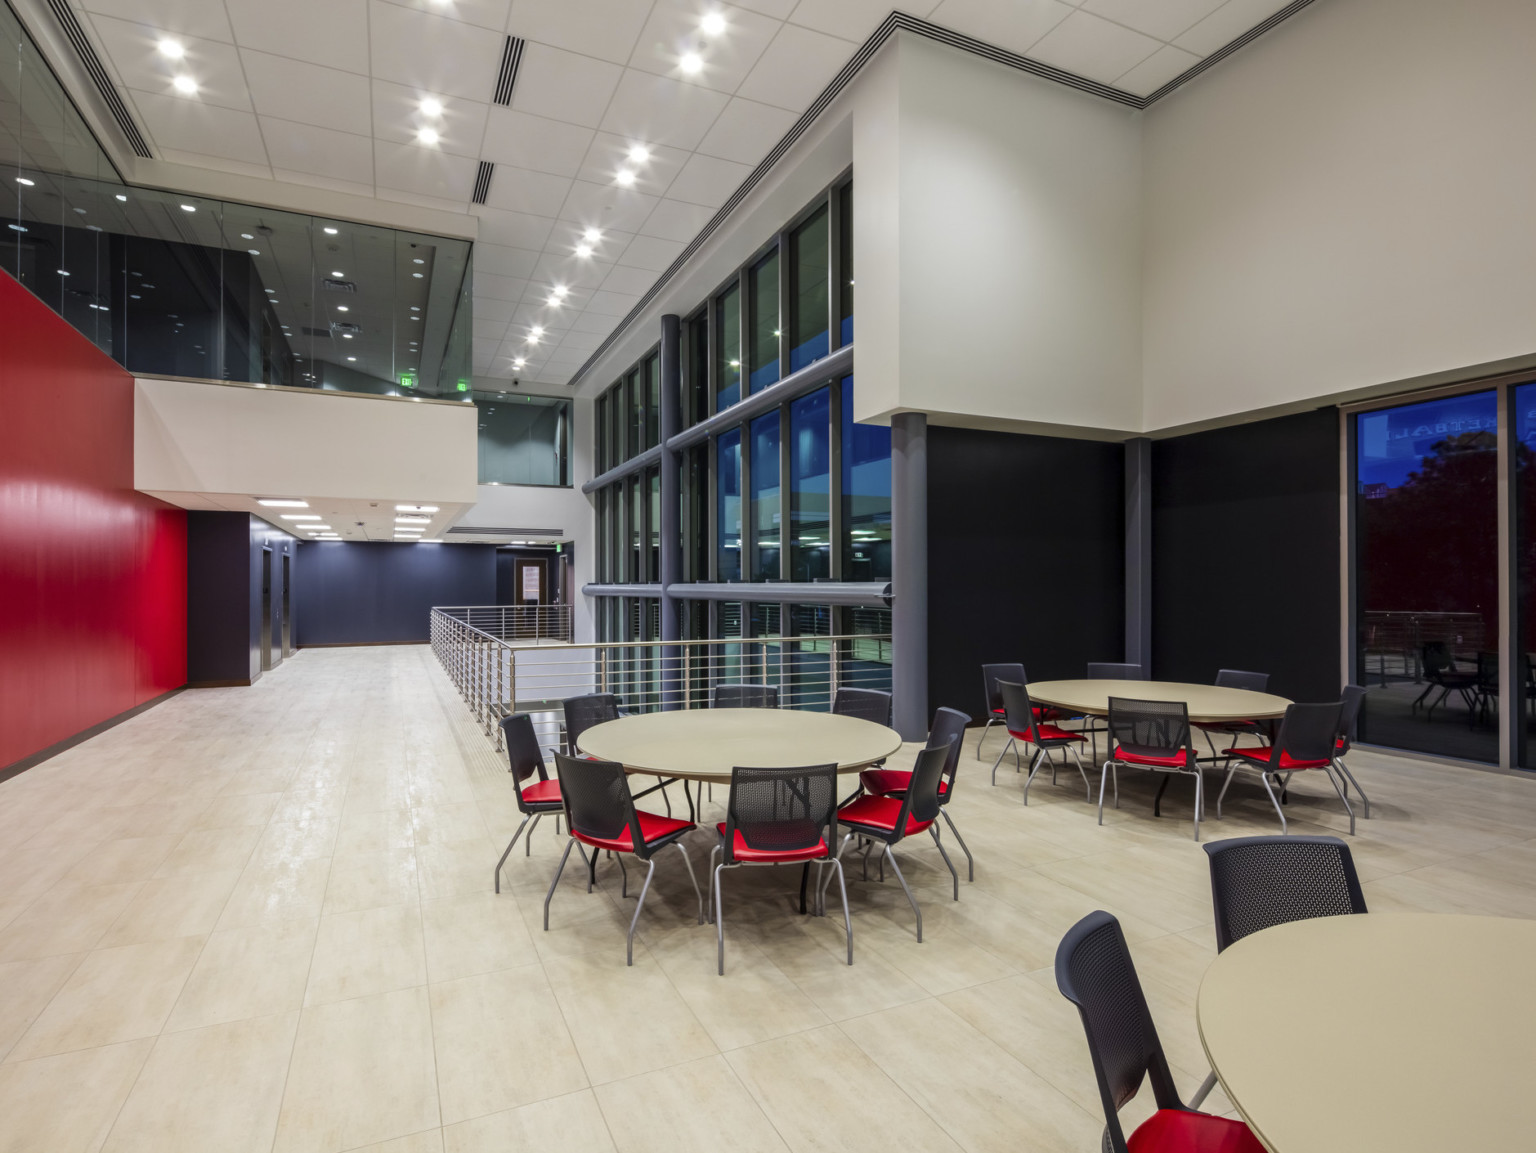 Double height window lined room with round tables and chairs. Red wall left and overhang with floor to ceiling windows above